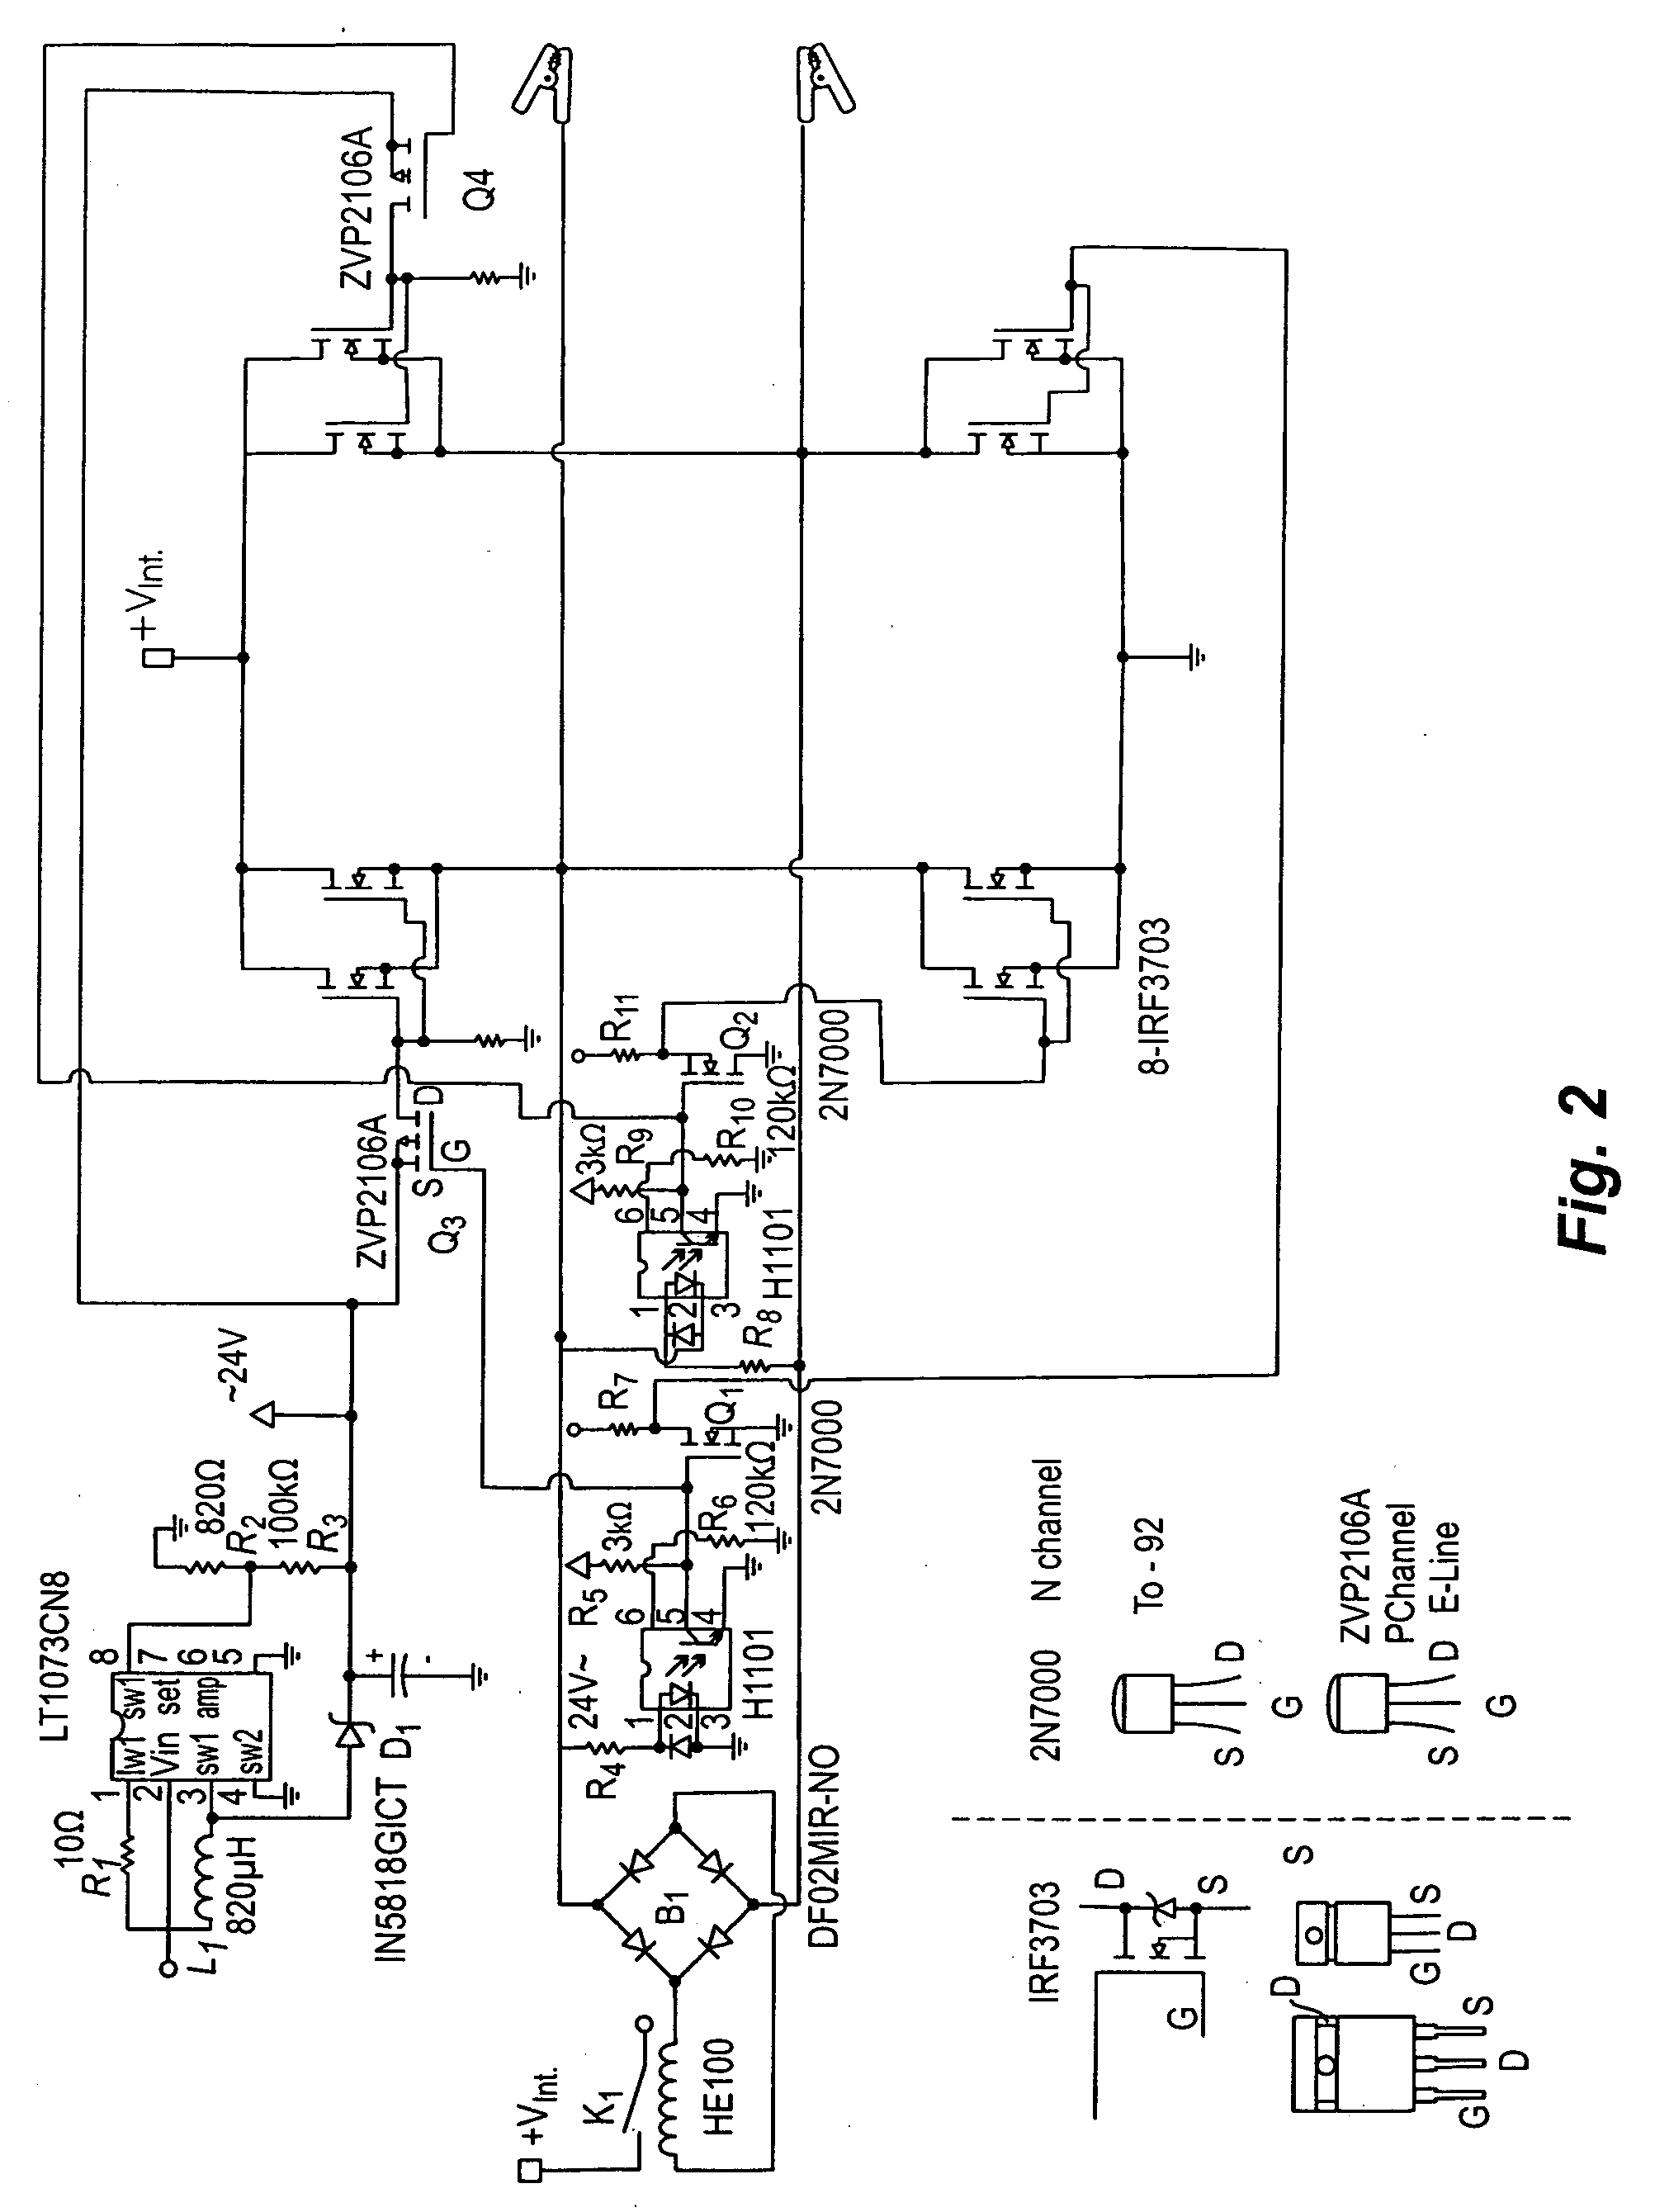 Automotive jump starter with polarity detection and current routing circuitry